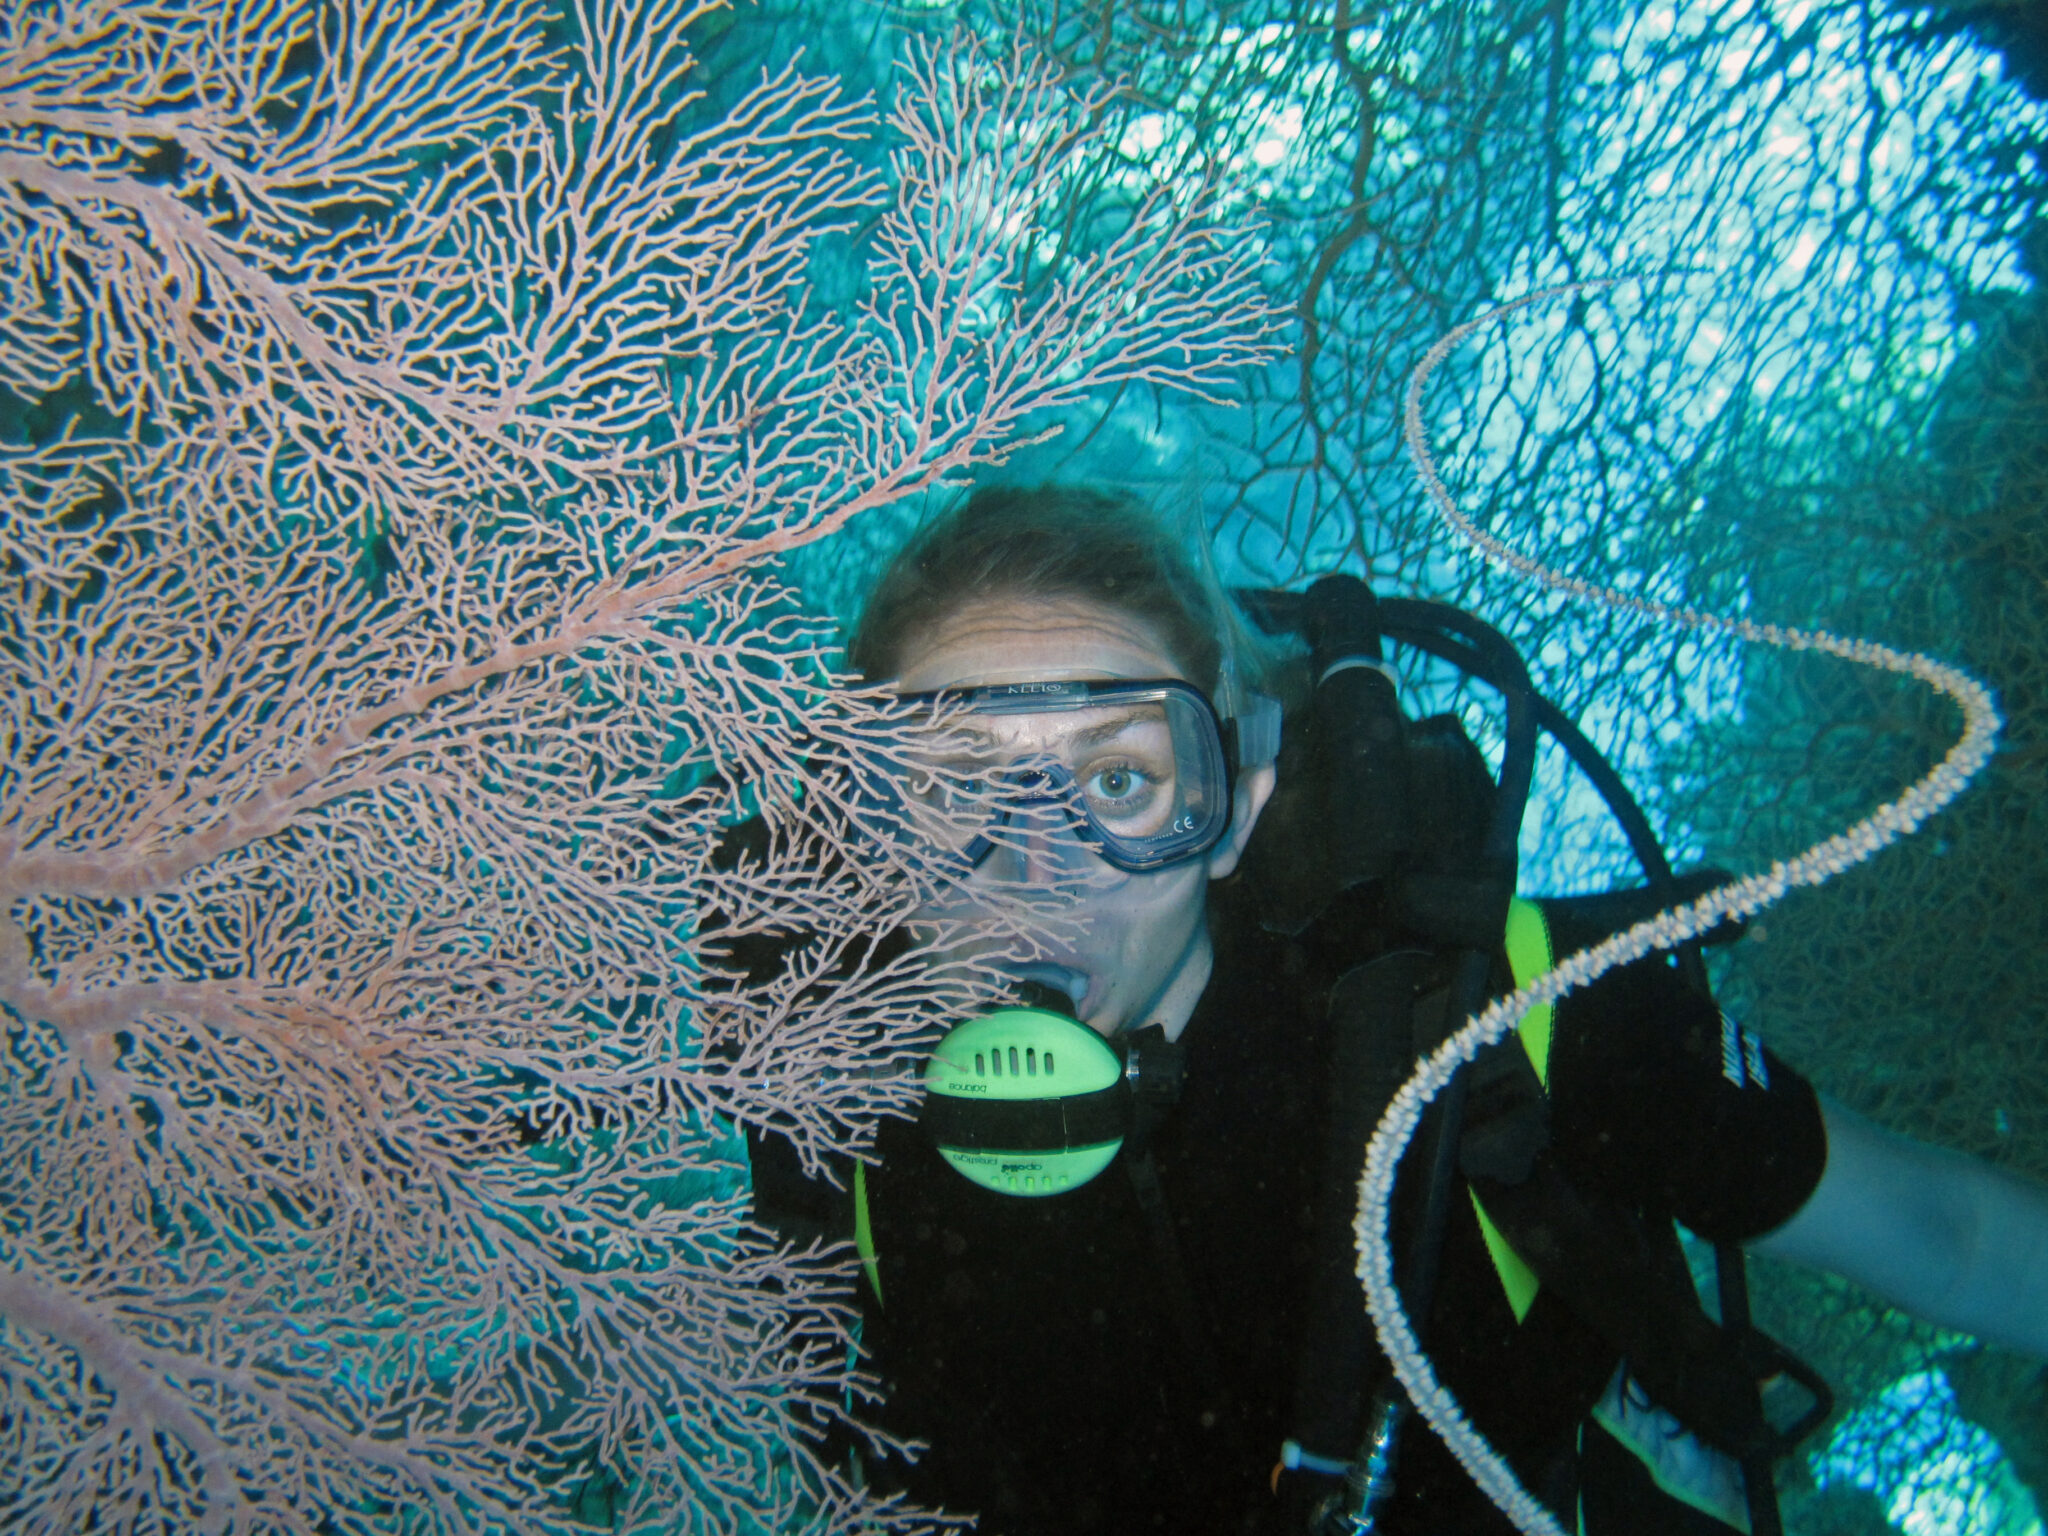 A diver poses behind a sea fan underwater